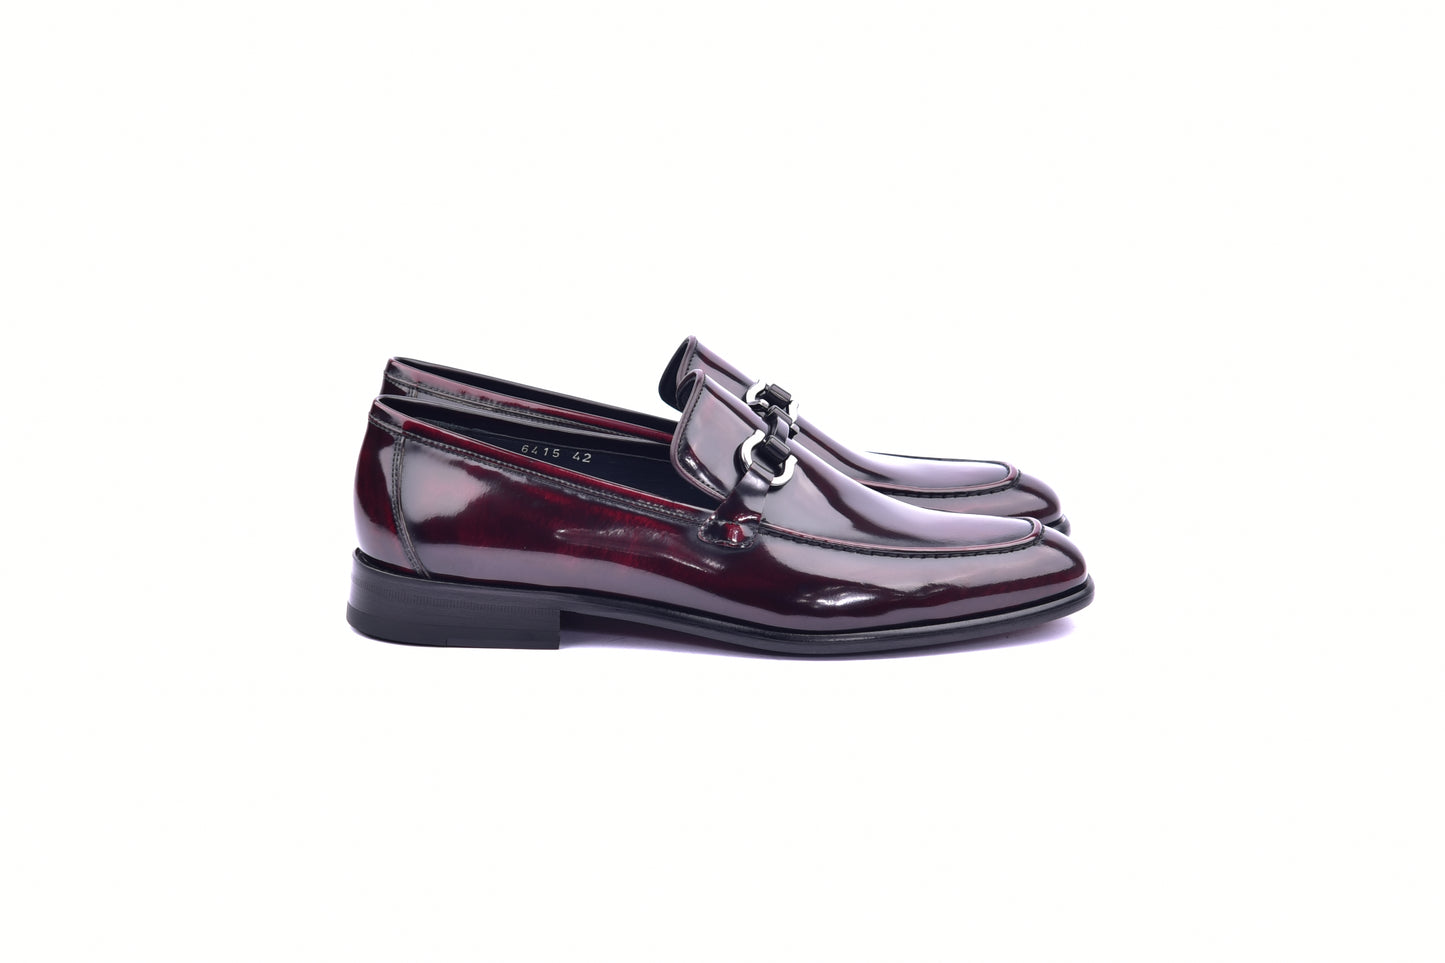 C0431-6415 Lux Calf Buckle Loafer- Burgundy